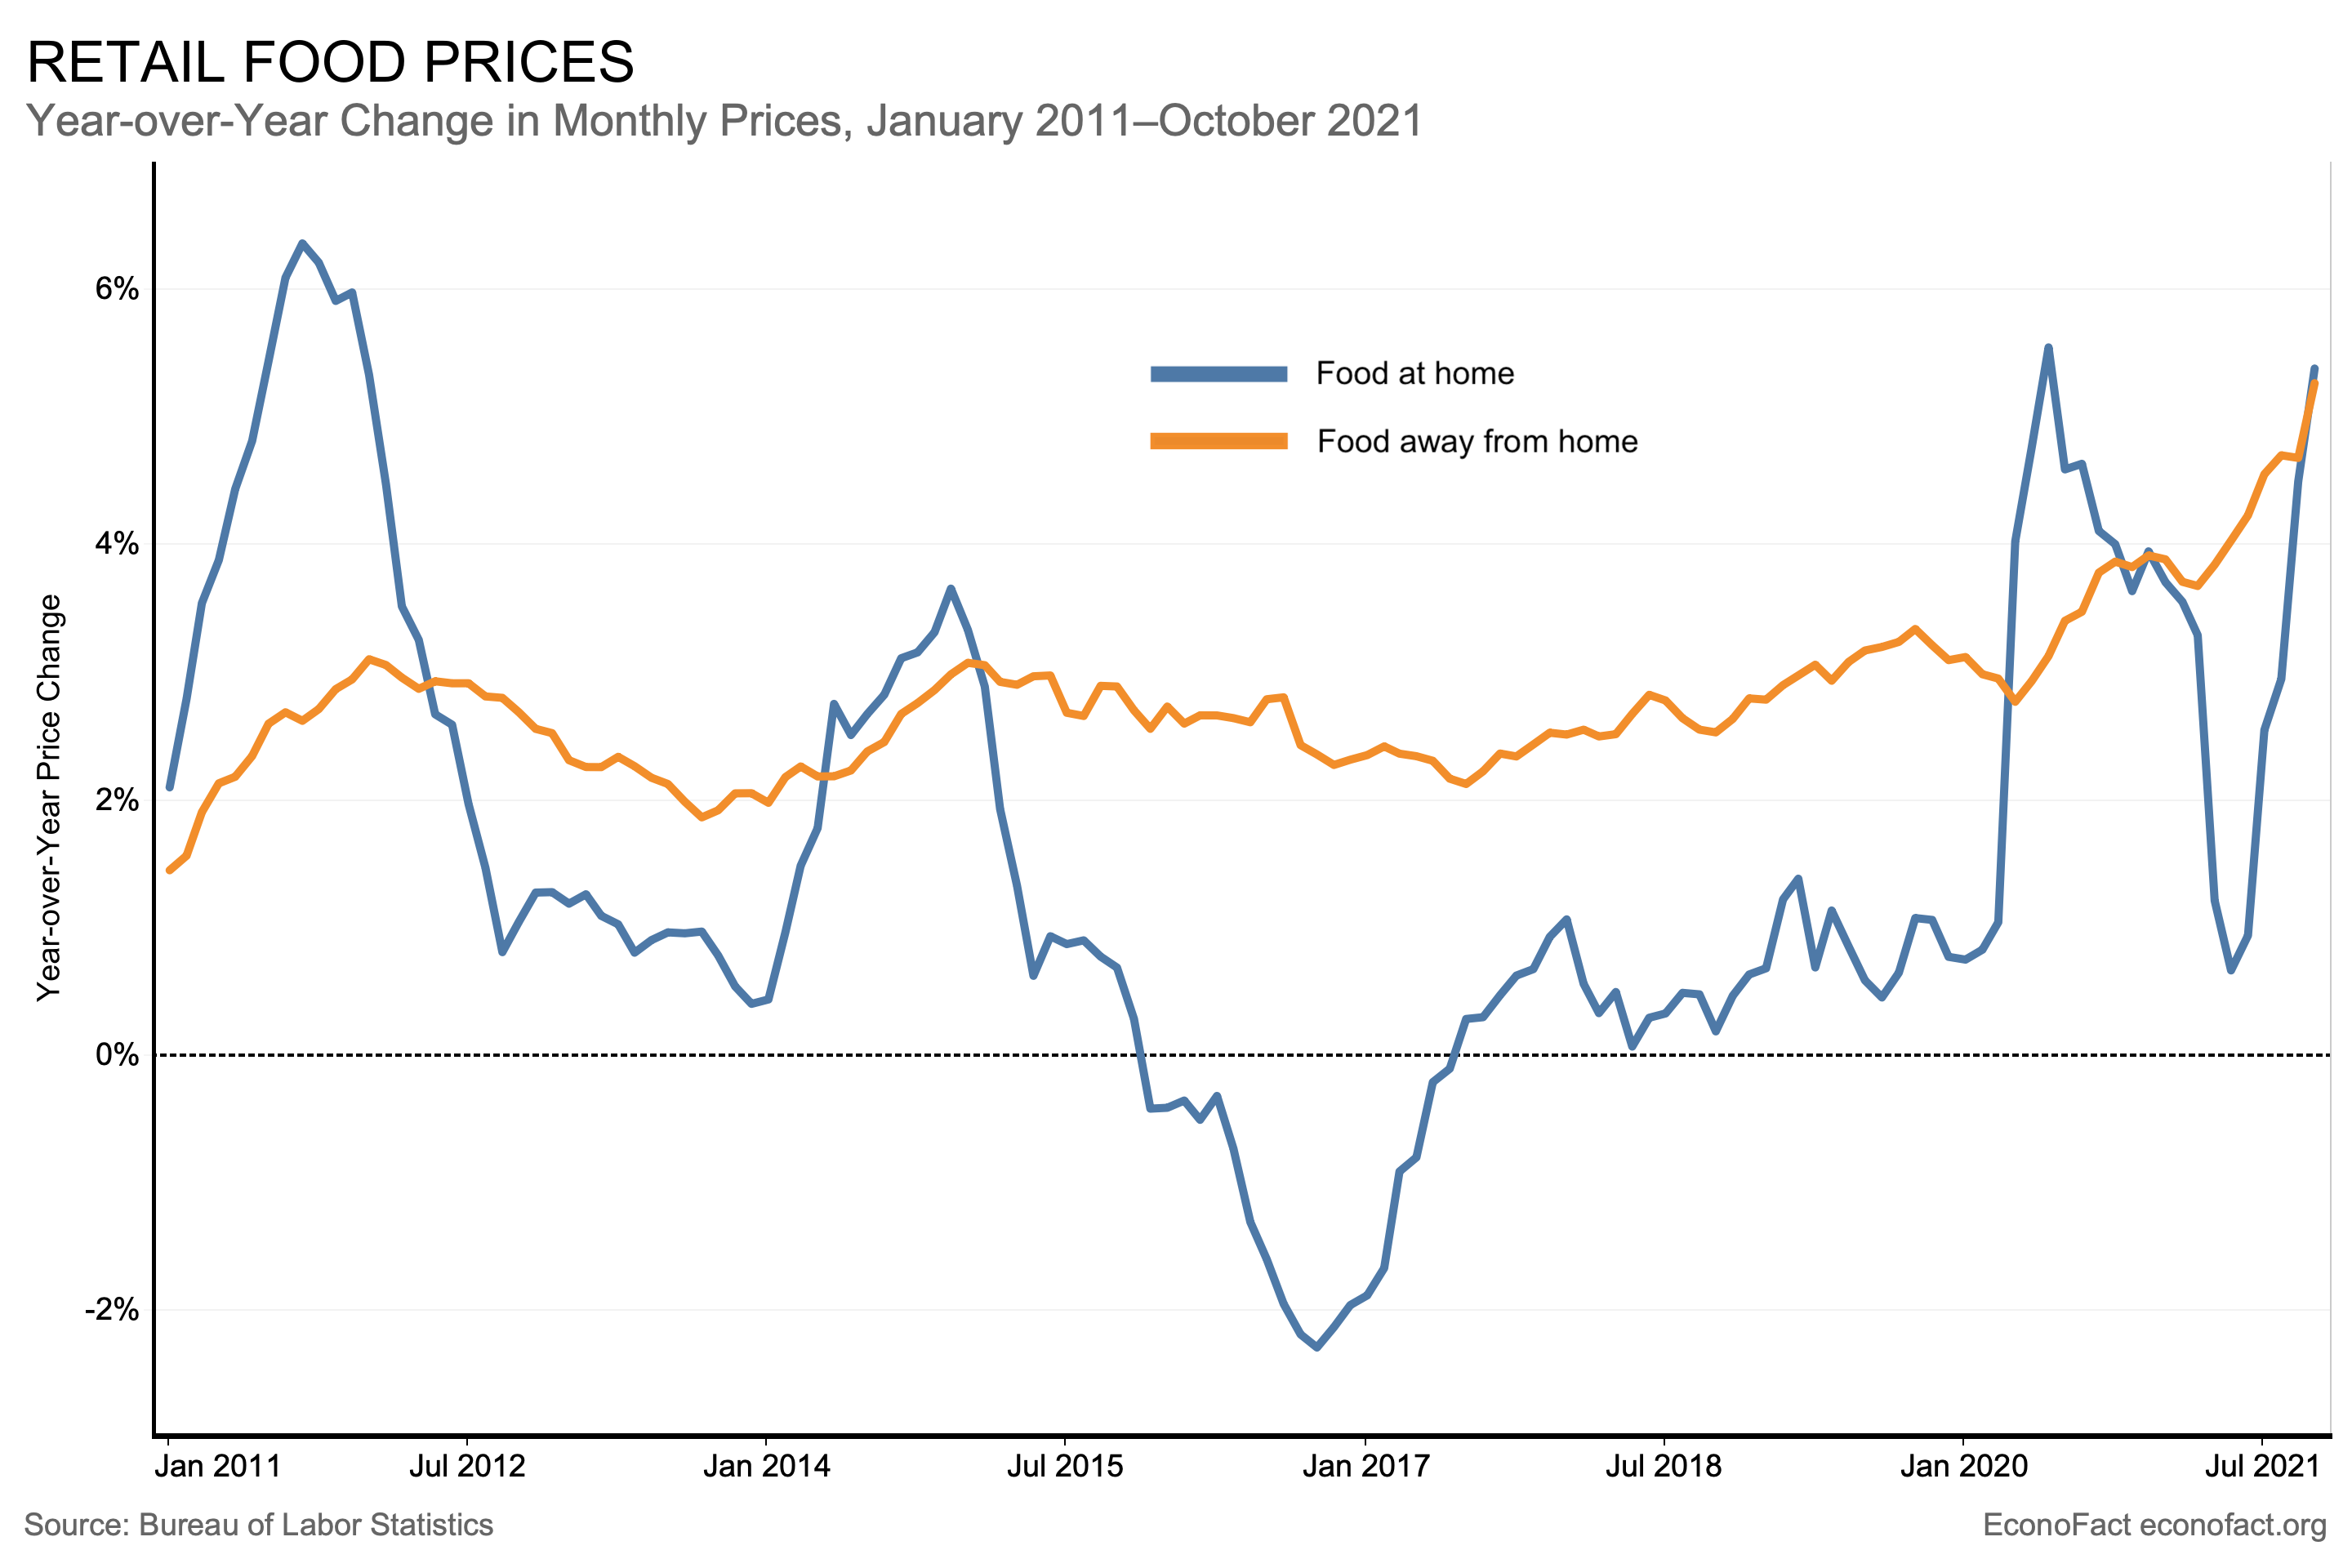 What Is Driving the Increase in Food Prices?